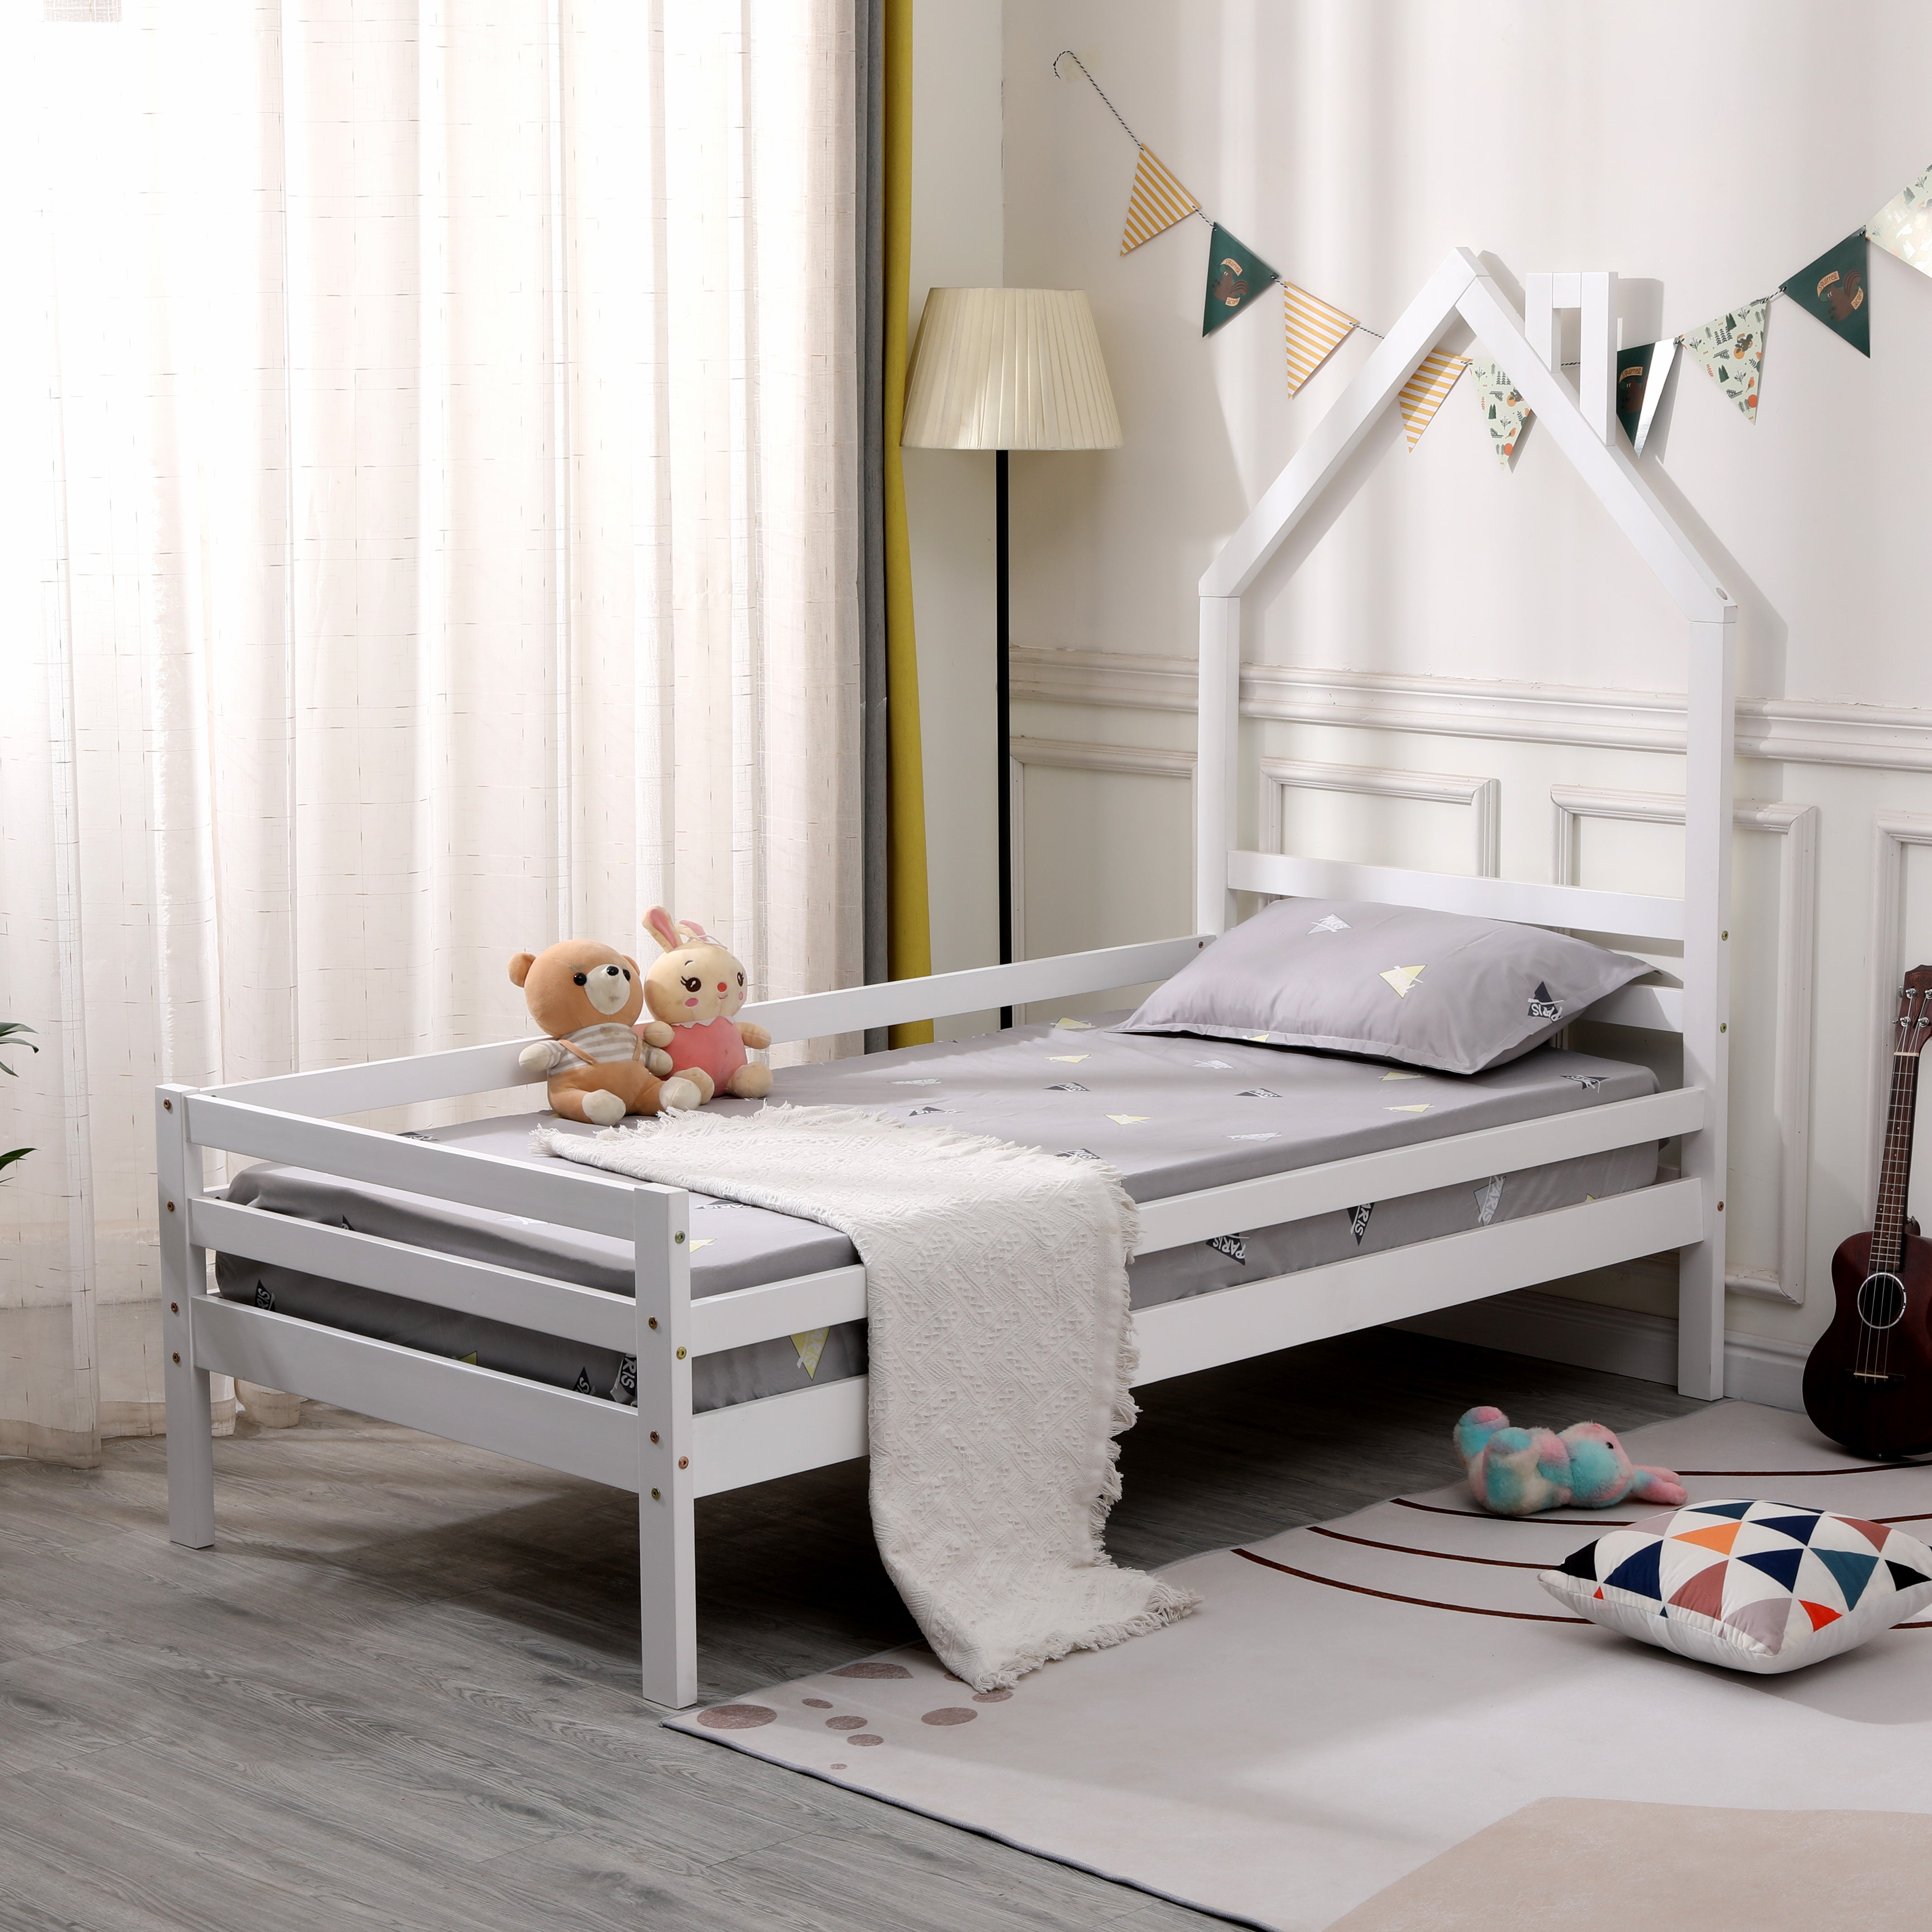 Theo Kids Wooden House Style Single Bed Frame in White – Furniture Online